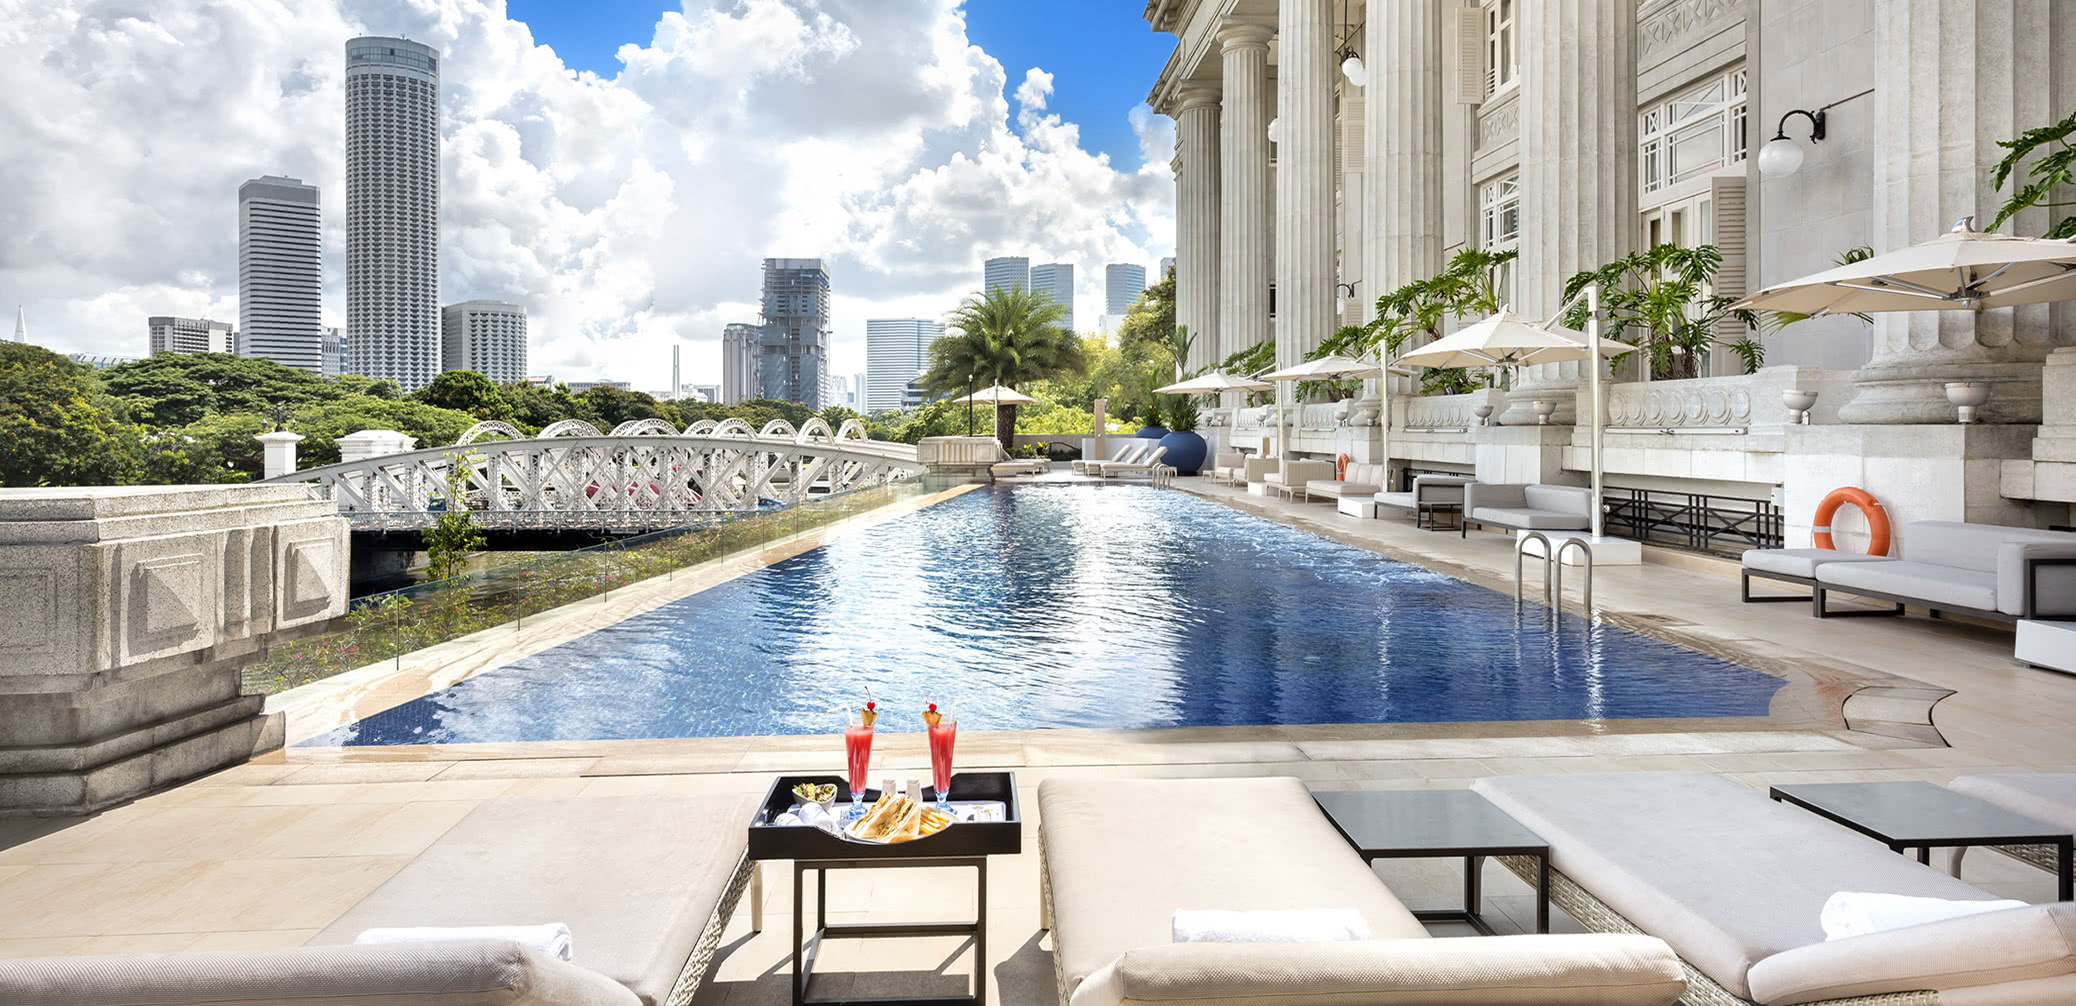 Review: The Fullerton Hotel Singapore